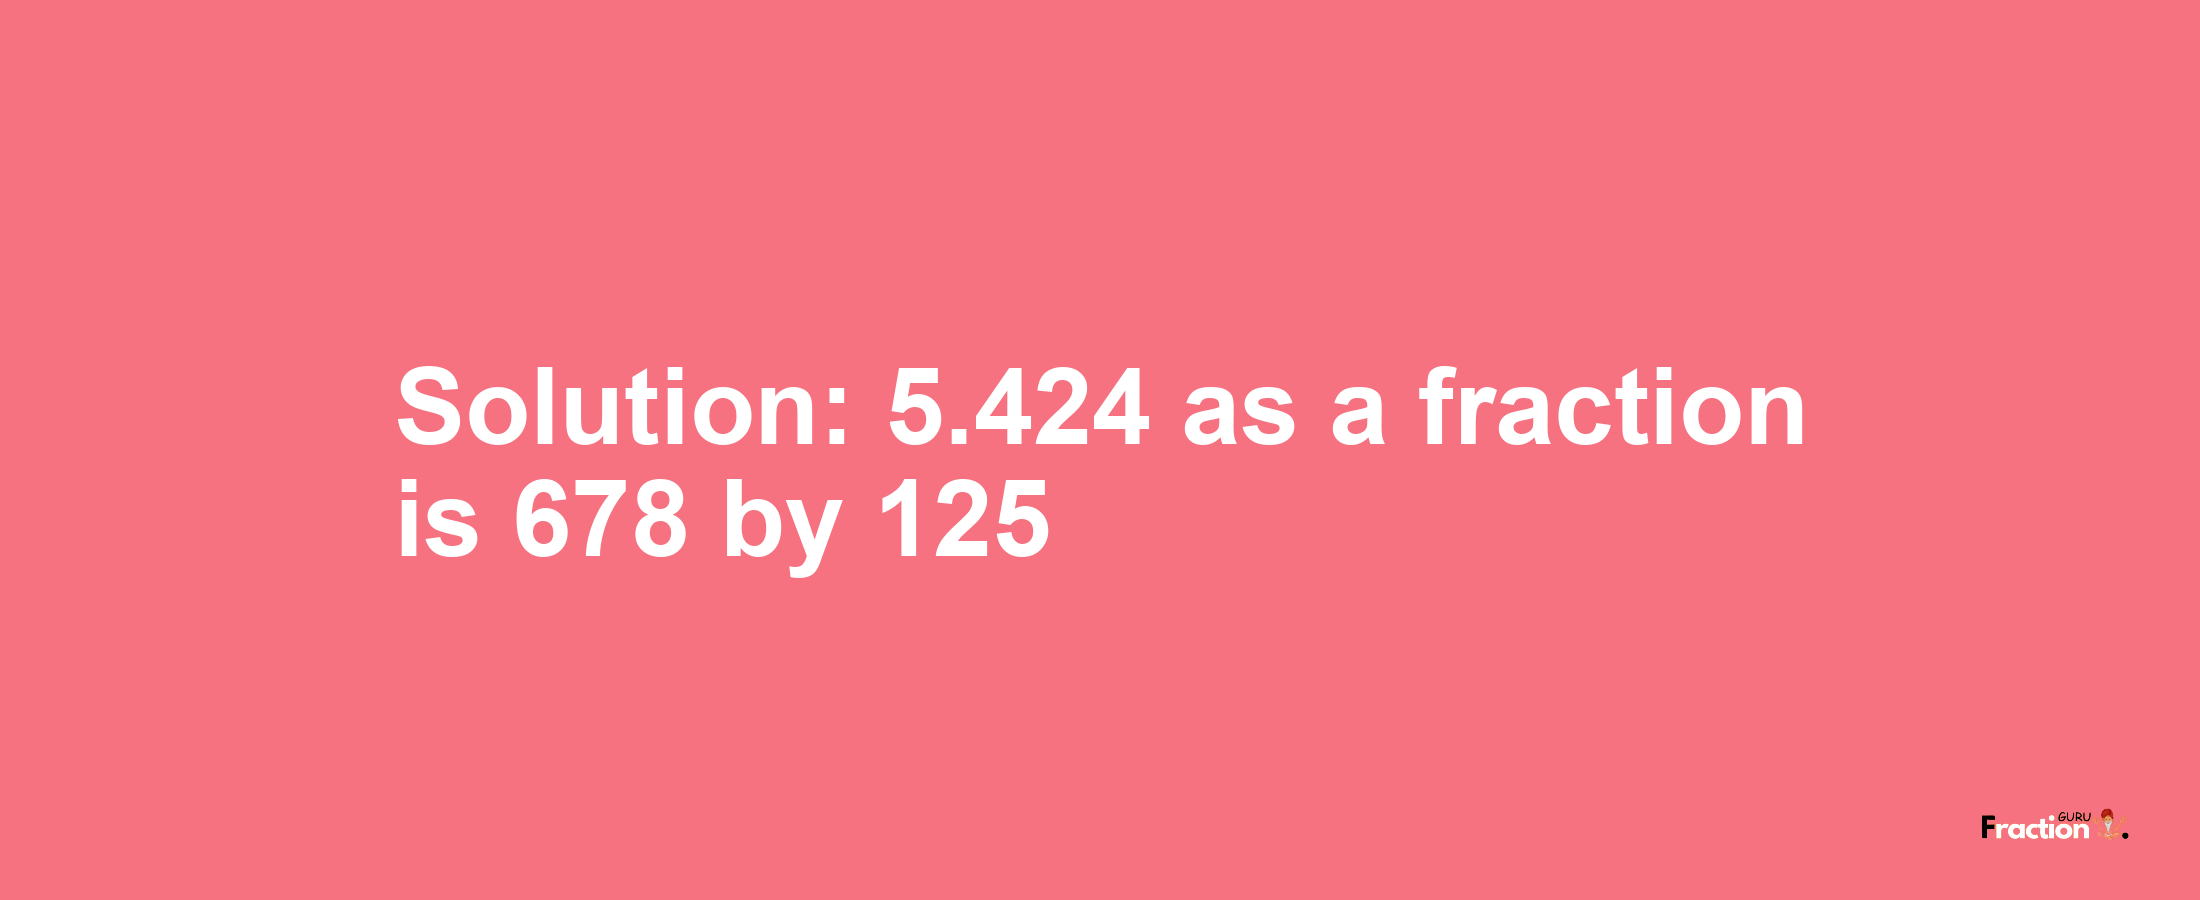 Solution:5.424 as a fraction is 678/125